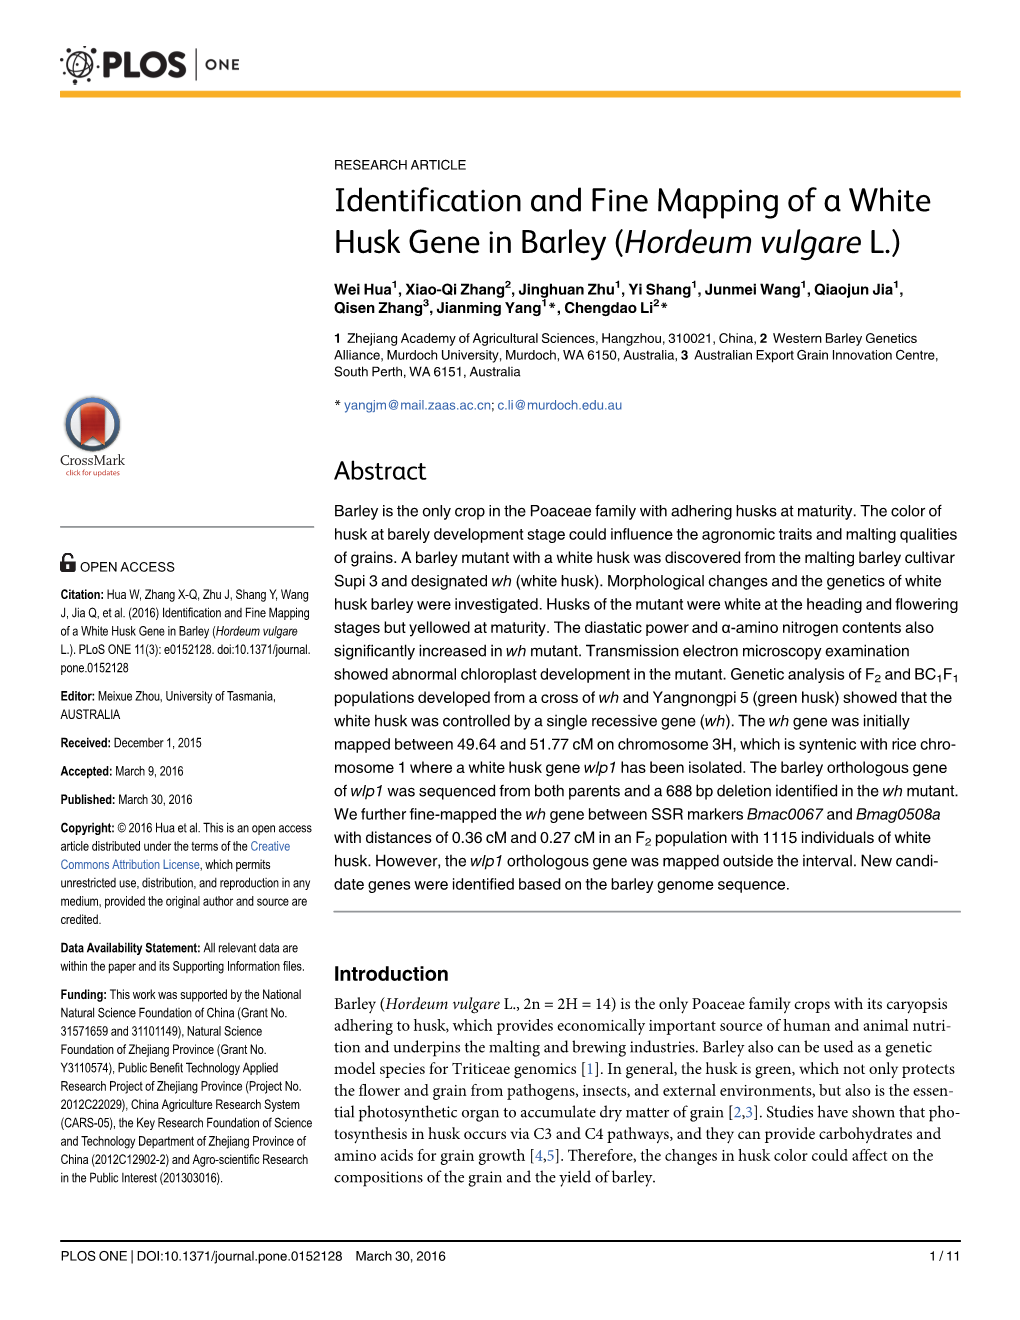 Identification and Fine Mapping of a White Husk Gene in Barley (Hordeum Vulgare L.)